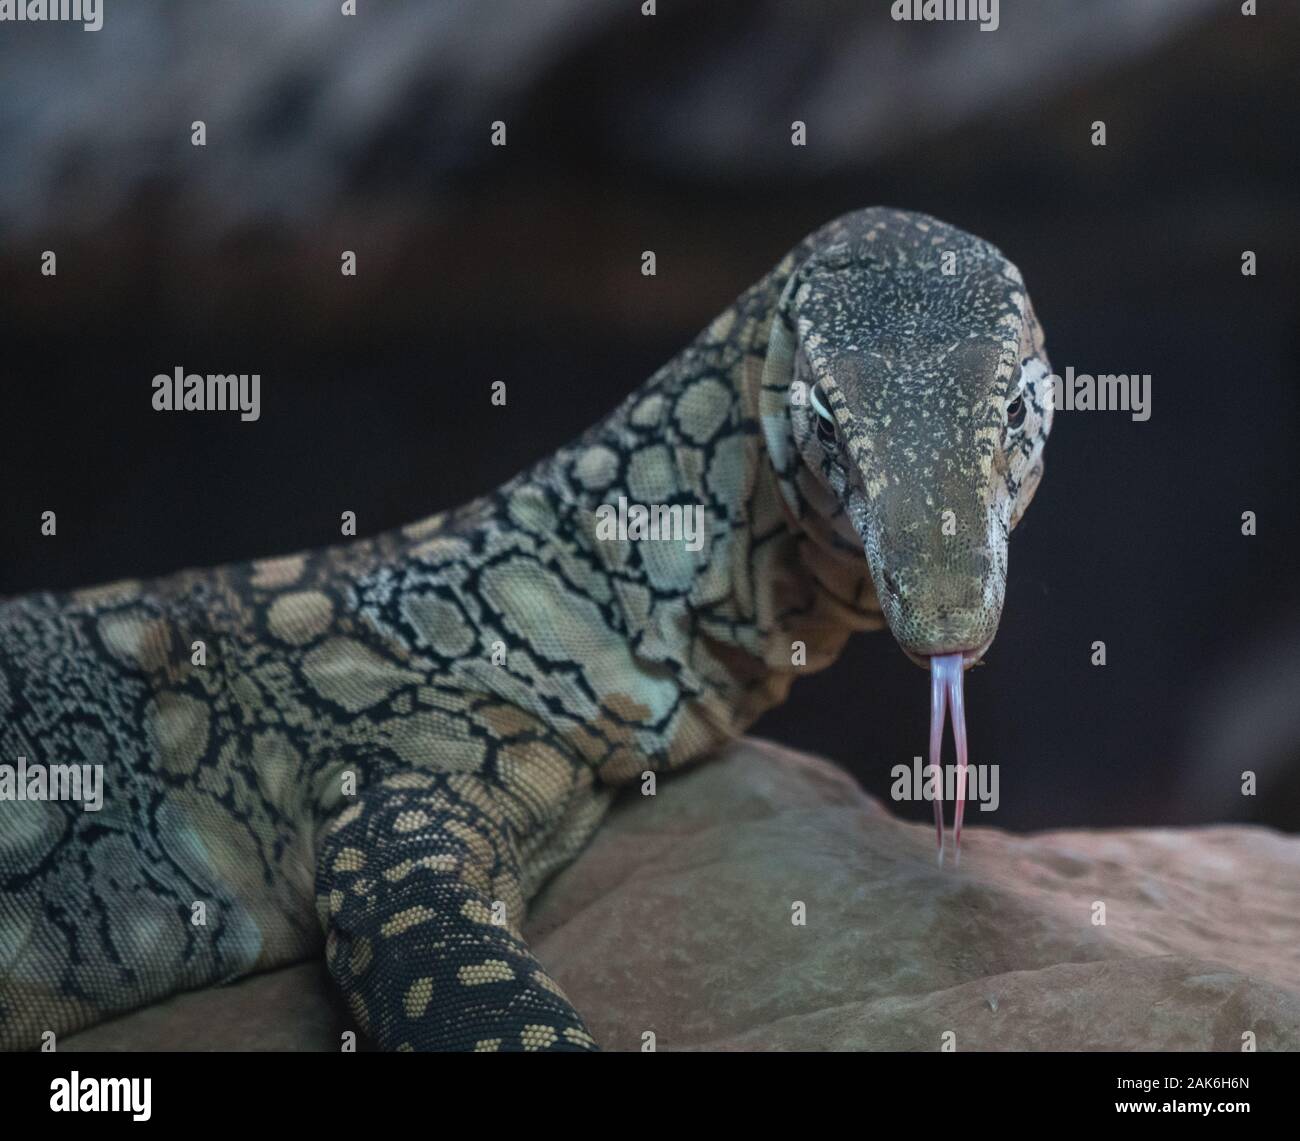 Perentie monitor lizard flicks out it's tongue to smell the air. Stock Photo